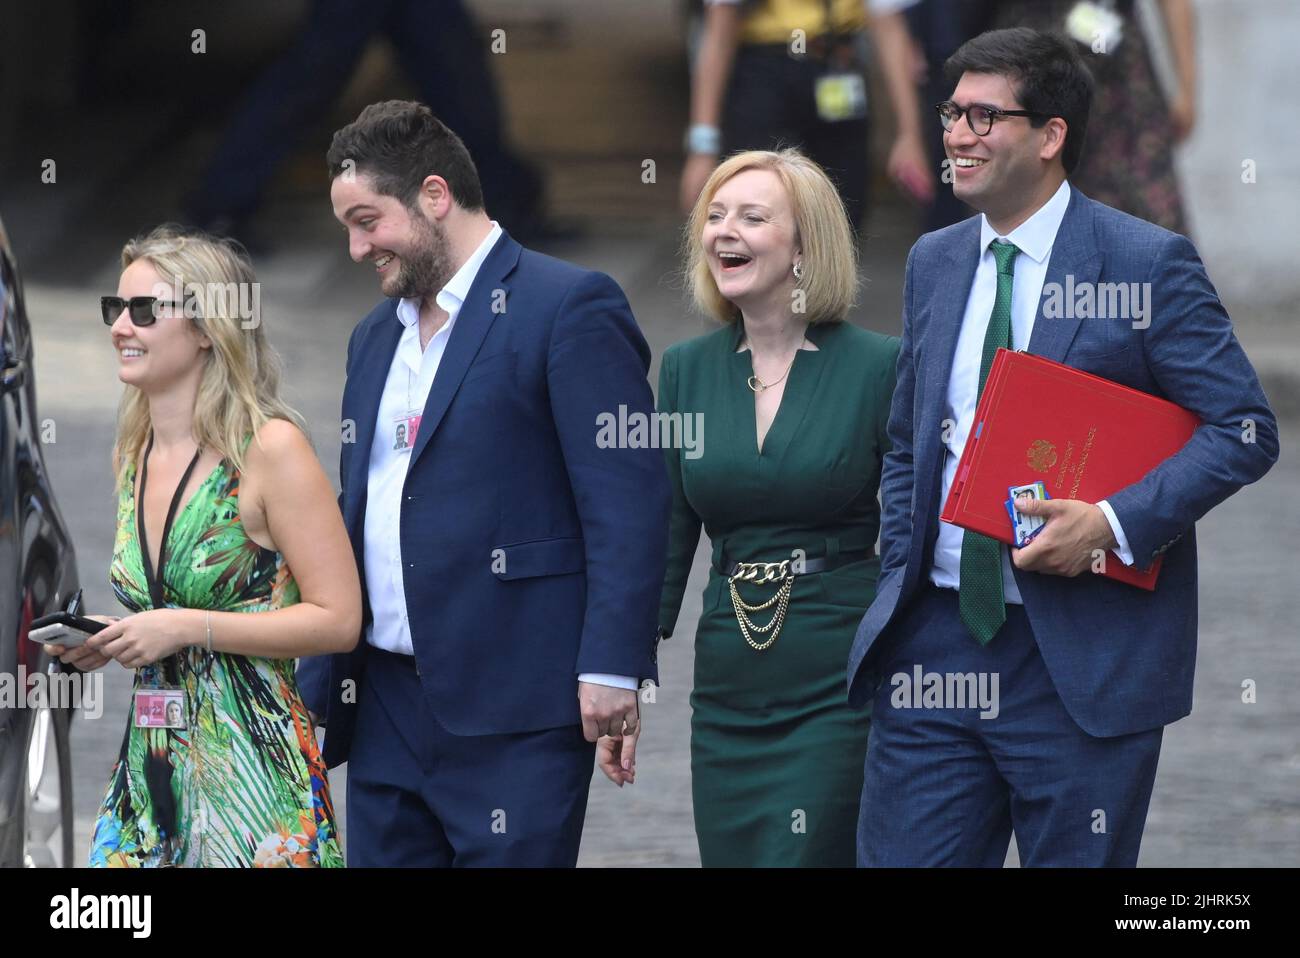 British Foreign Secretary and Conservative leadership candidate Liz Truss walks with members of her team near the houses of Parliament, in London, Britain, July 20, 2022. REUTERS/Toby Melville Stock Photo